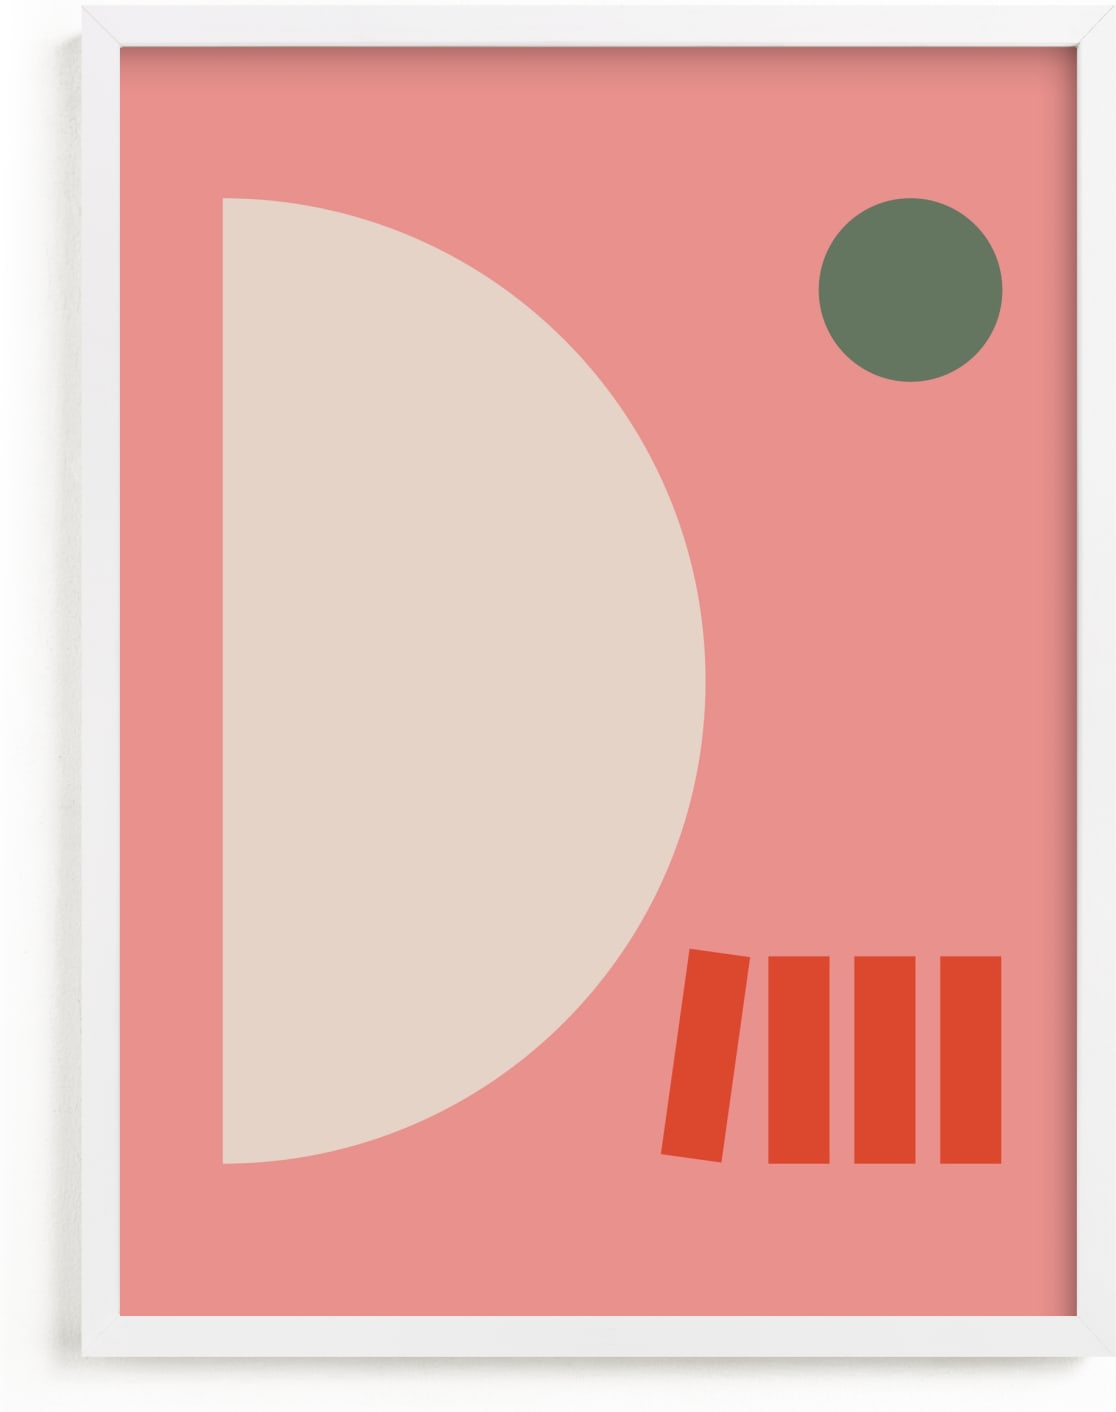 This is a pink, green, red art by Alex Roda called Giulietta.